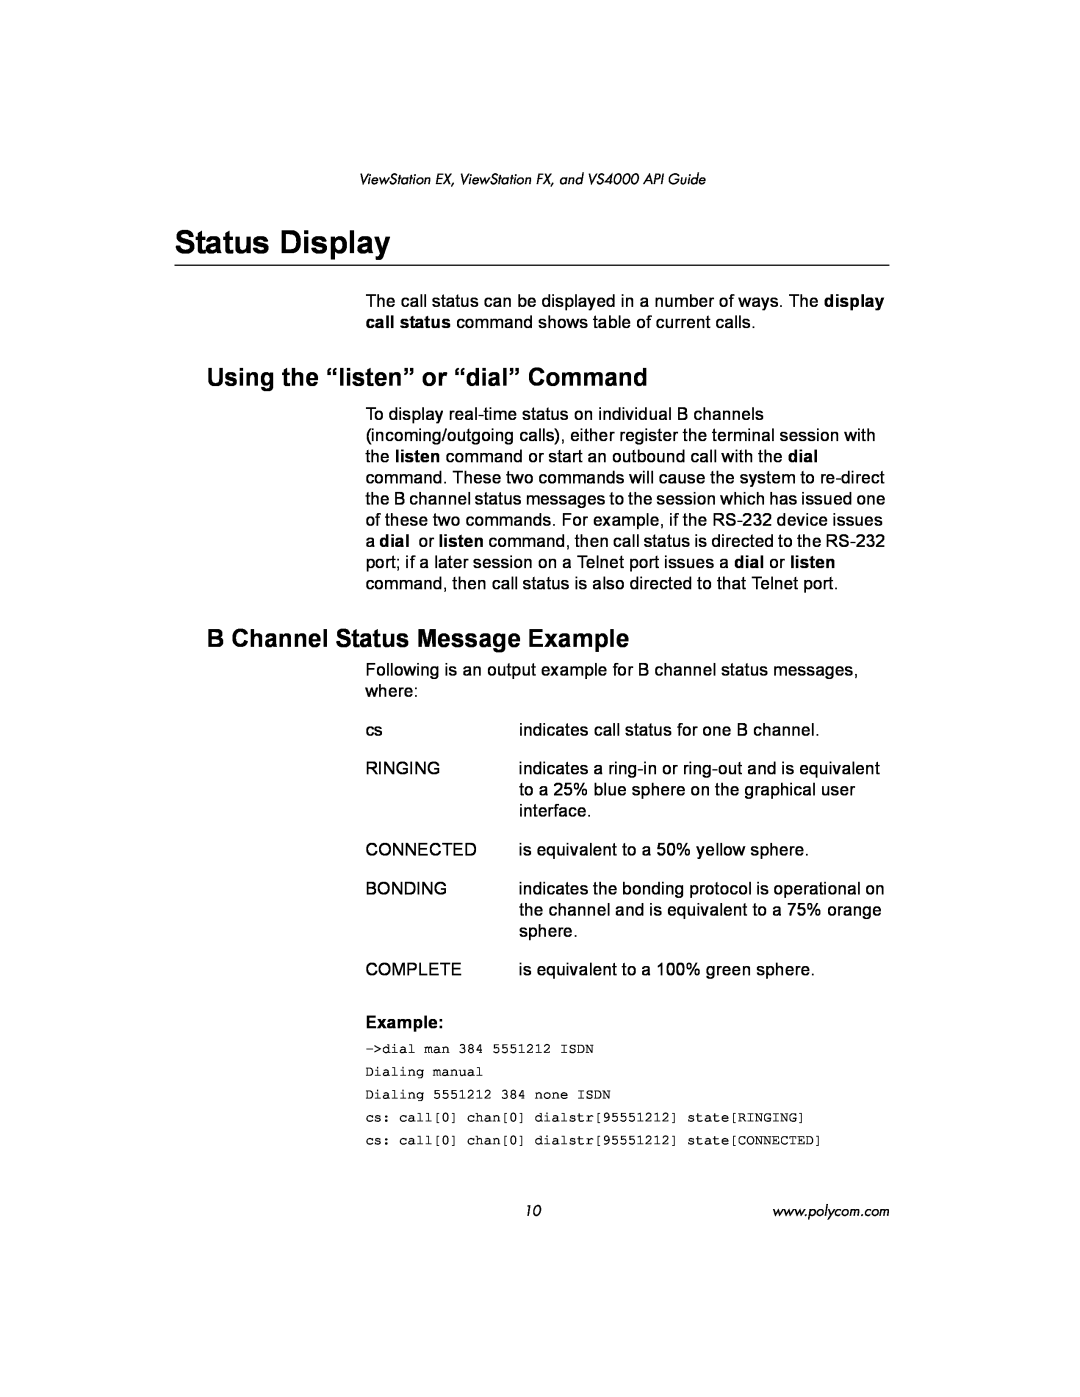 Polycom VIEWSTATION EX manual Status Display, Using the “listen” or “dial” Command, B Channel Status Message Example 